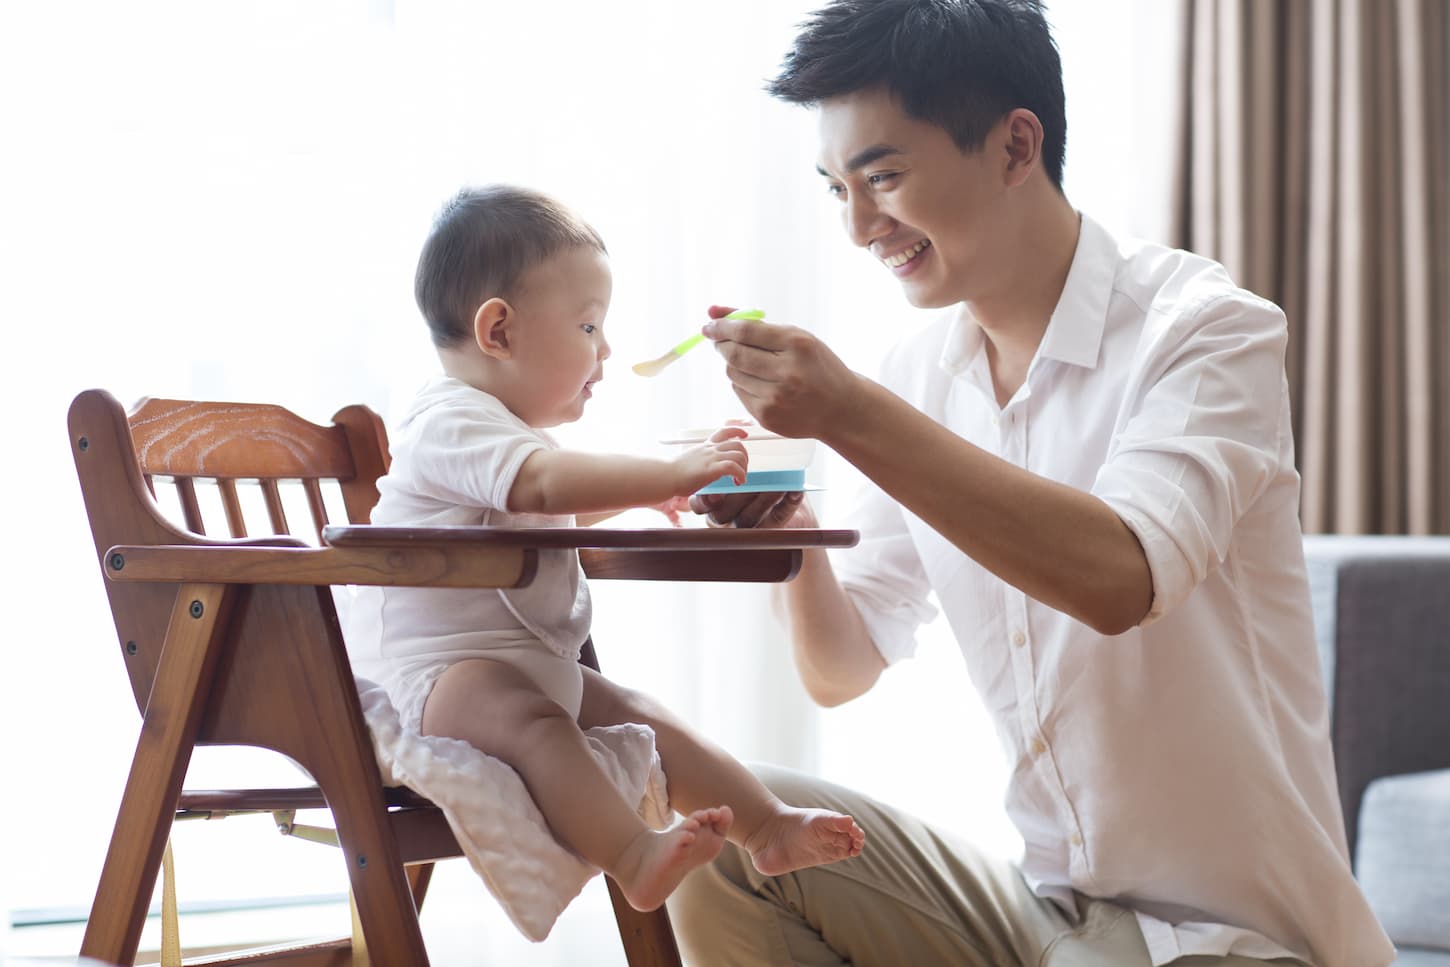 An image of a Young father feeding a baby in a high chair.